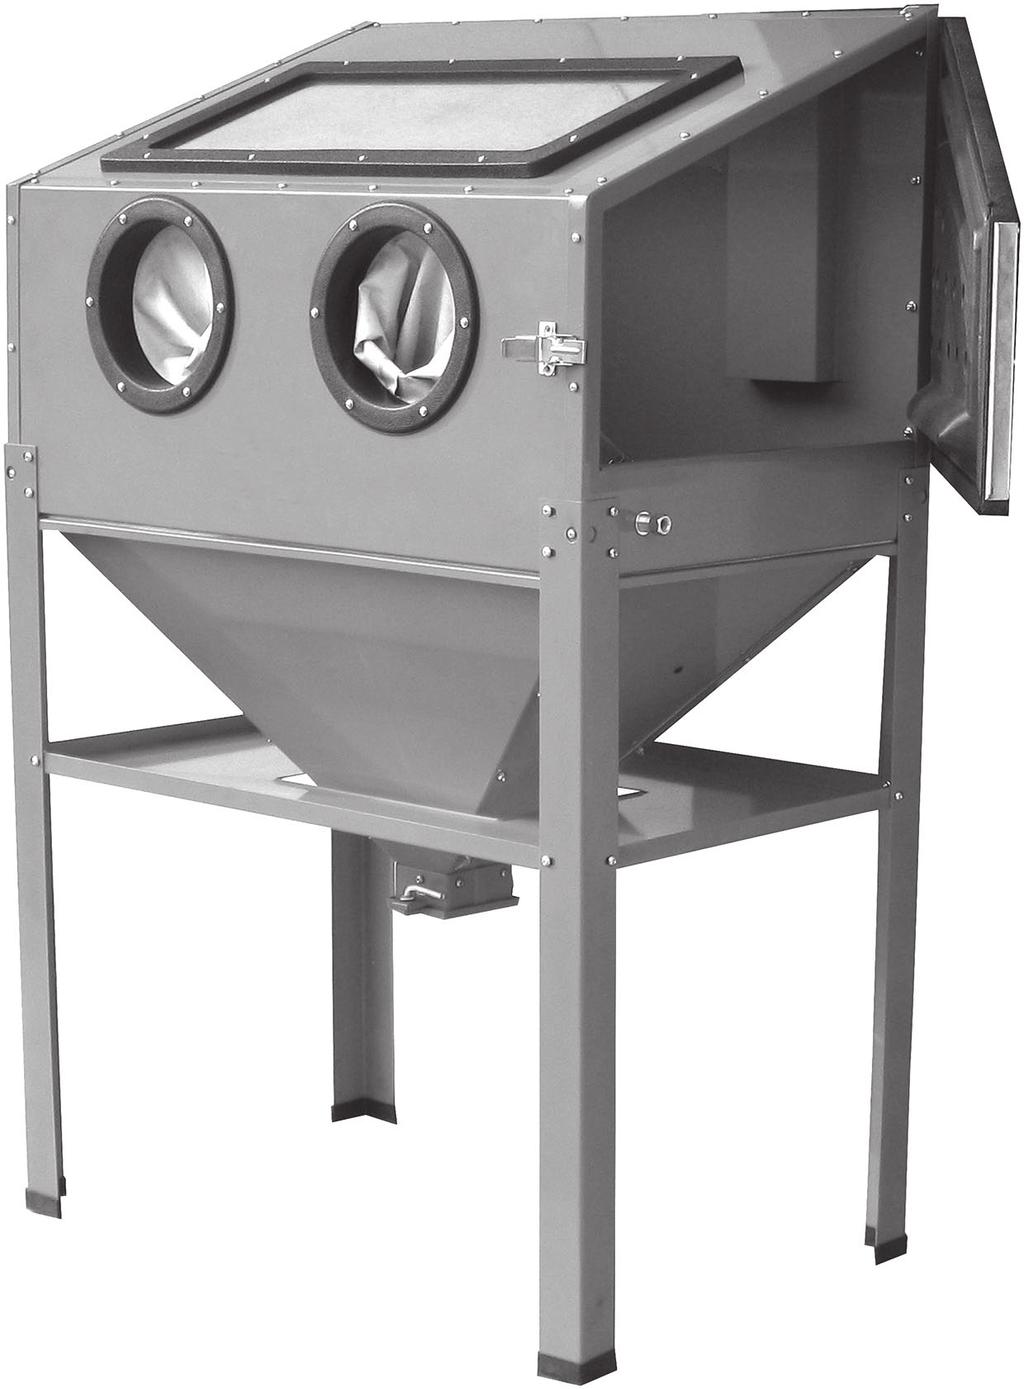 Keep this manual and the receipt in a safe and dry place for future reference. 40 lb. capacity floor blast cabinet Visit our website at: http://www.harborfreight.